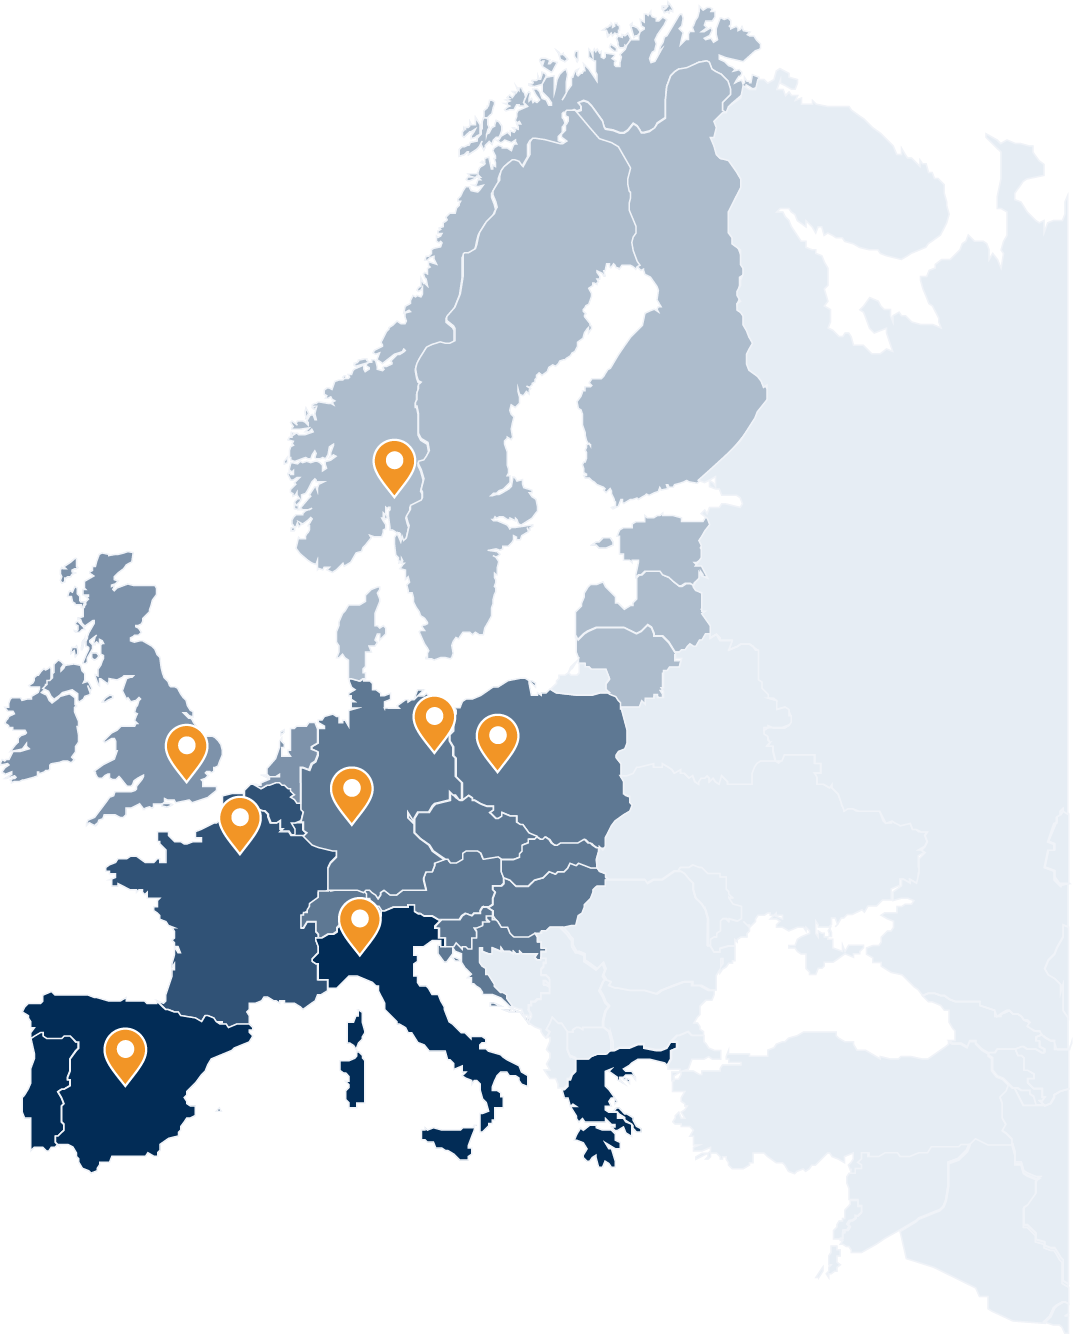 Our presence in Europe | Scope Group